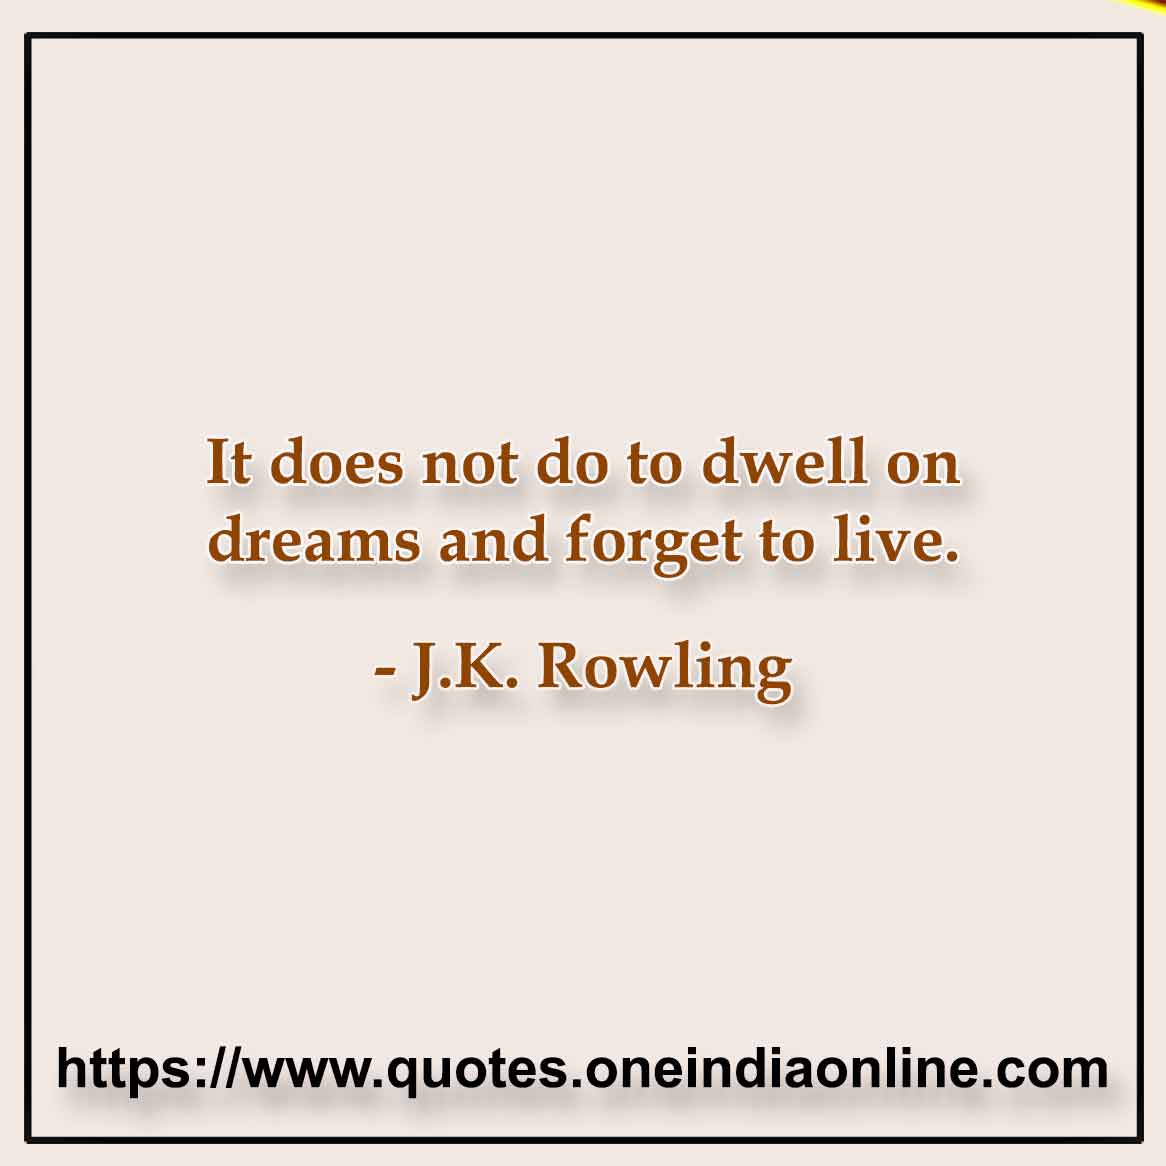 It does not do to dwell on dreams and forget to live.

- J.K. Rowling